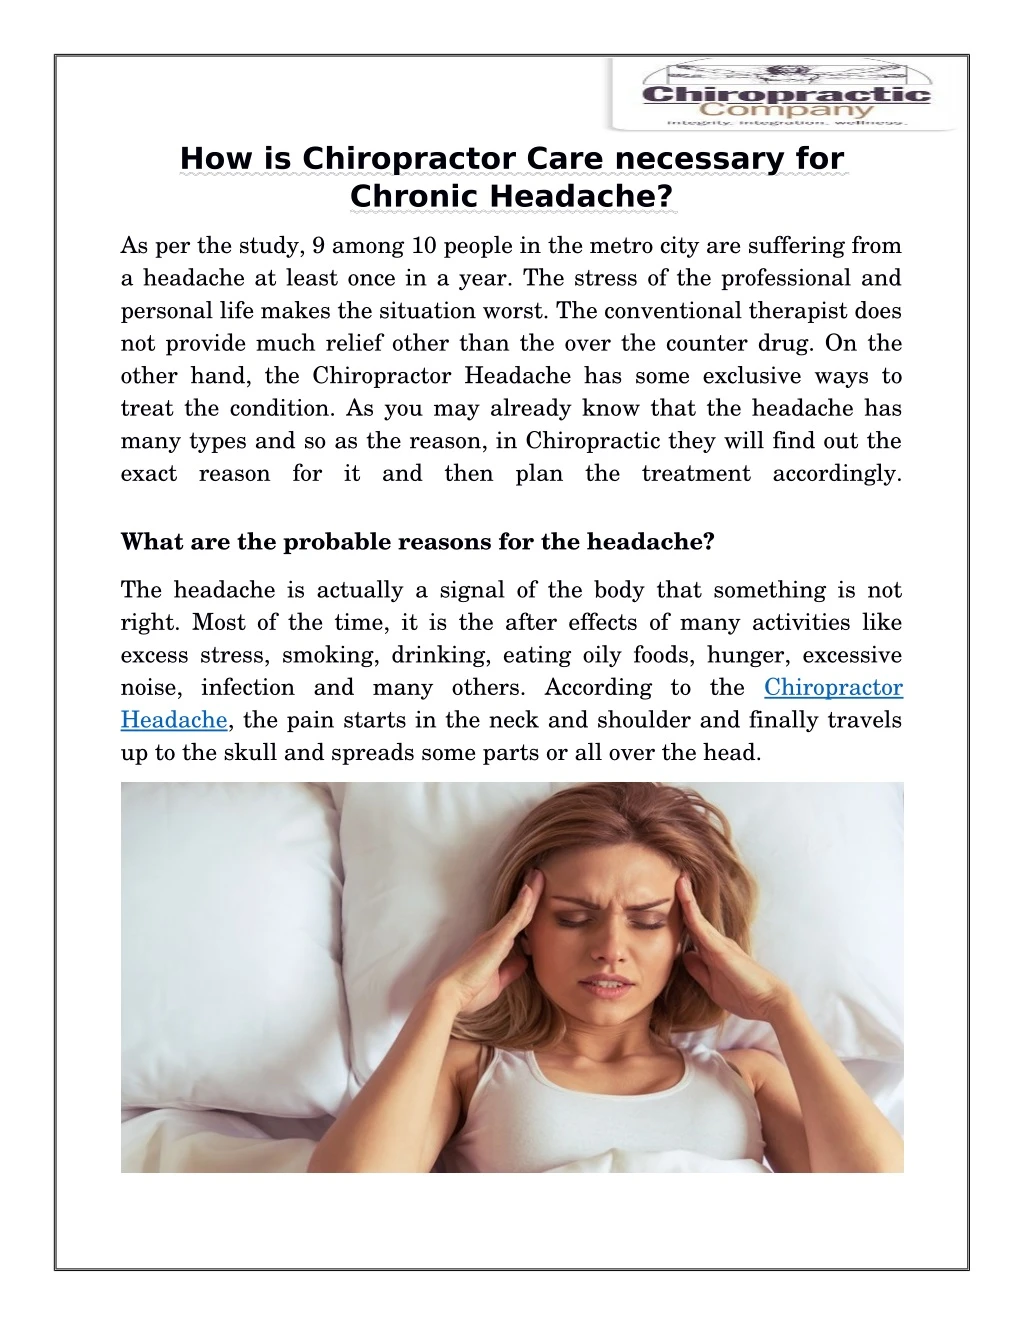 how is chiropractor care necessary for chronic